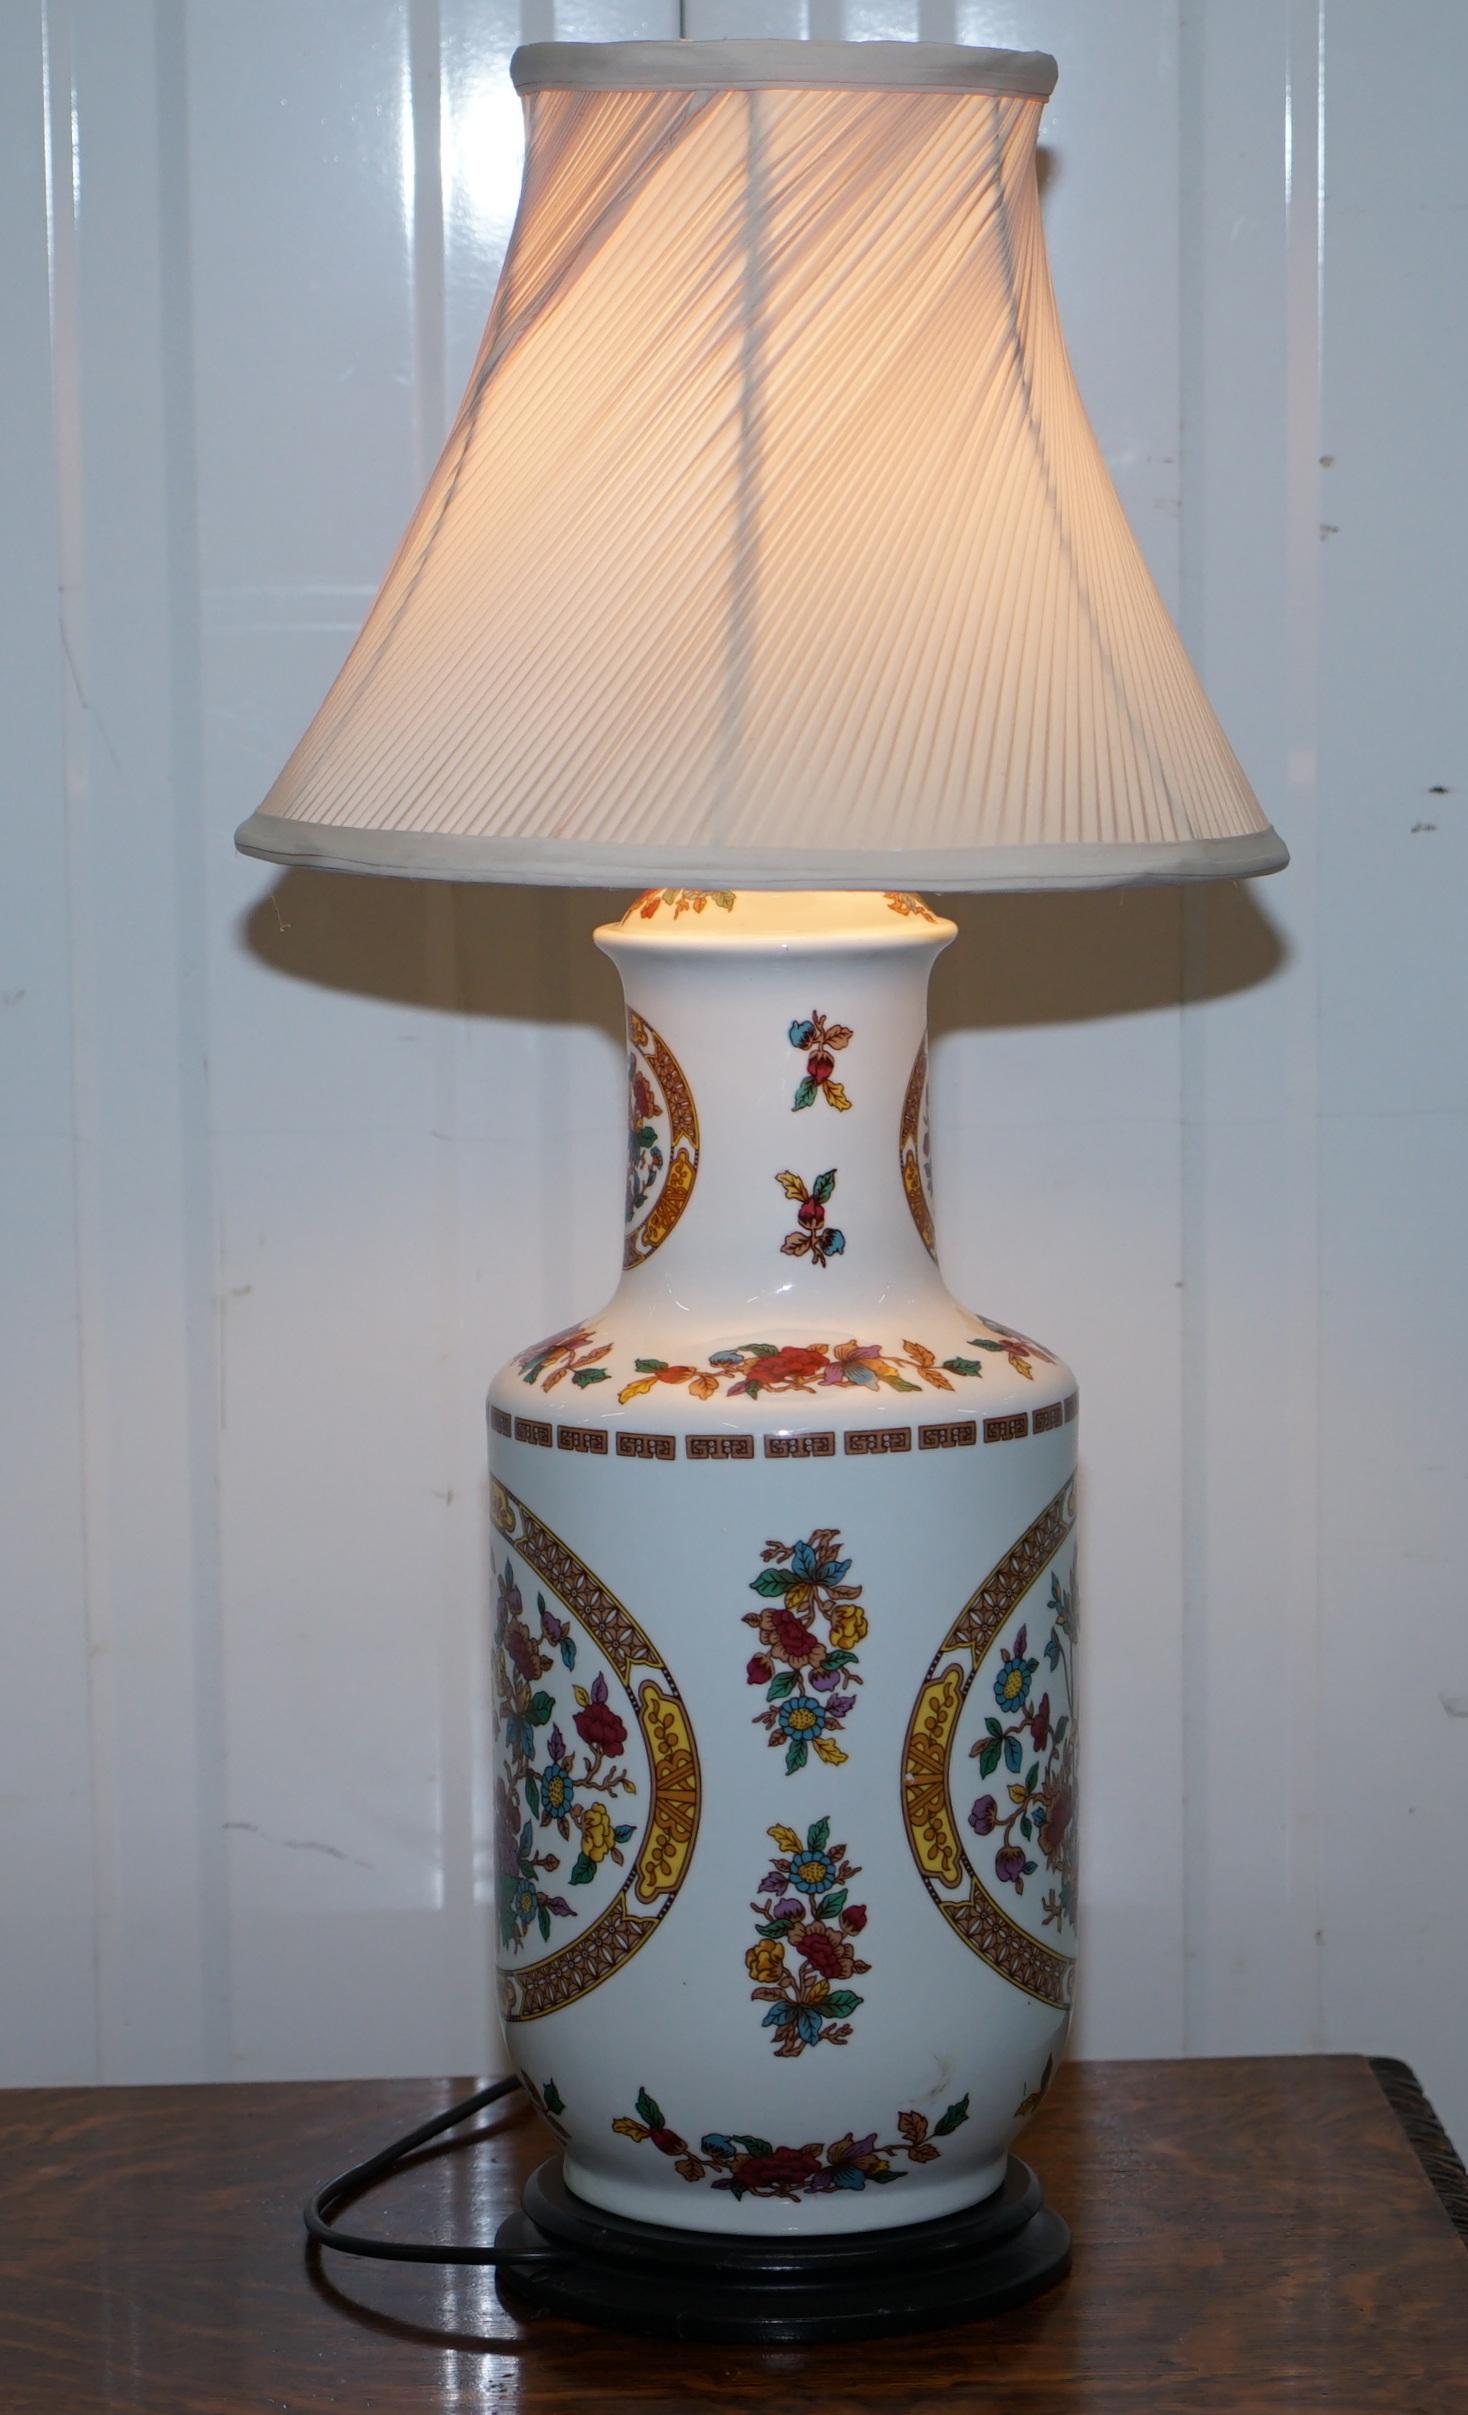 We are delighted to offer for sale this lovely vintage Chinese vase converted into a lamp

A very good looking and well-made lamp, exceptionally decorative and I think the only one of its type

Its been restored to include new cable plug and